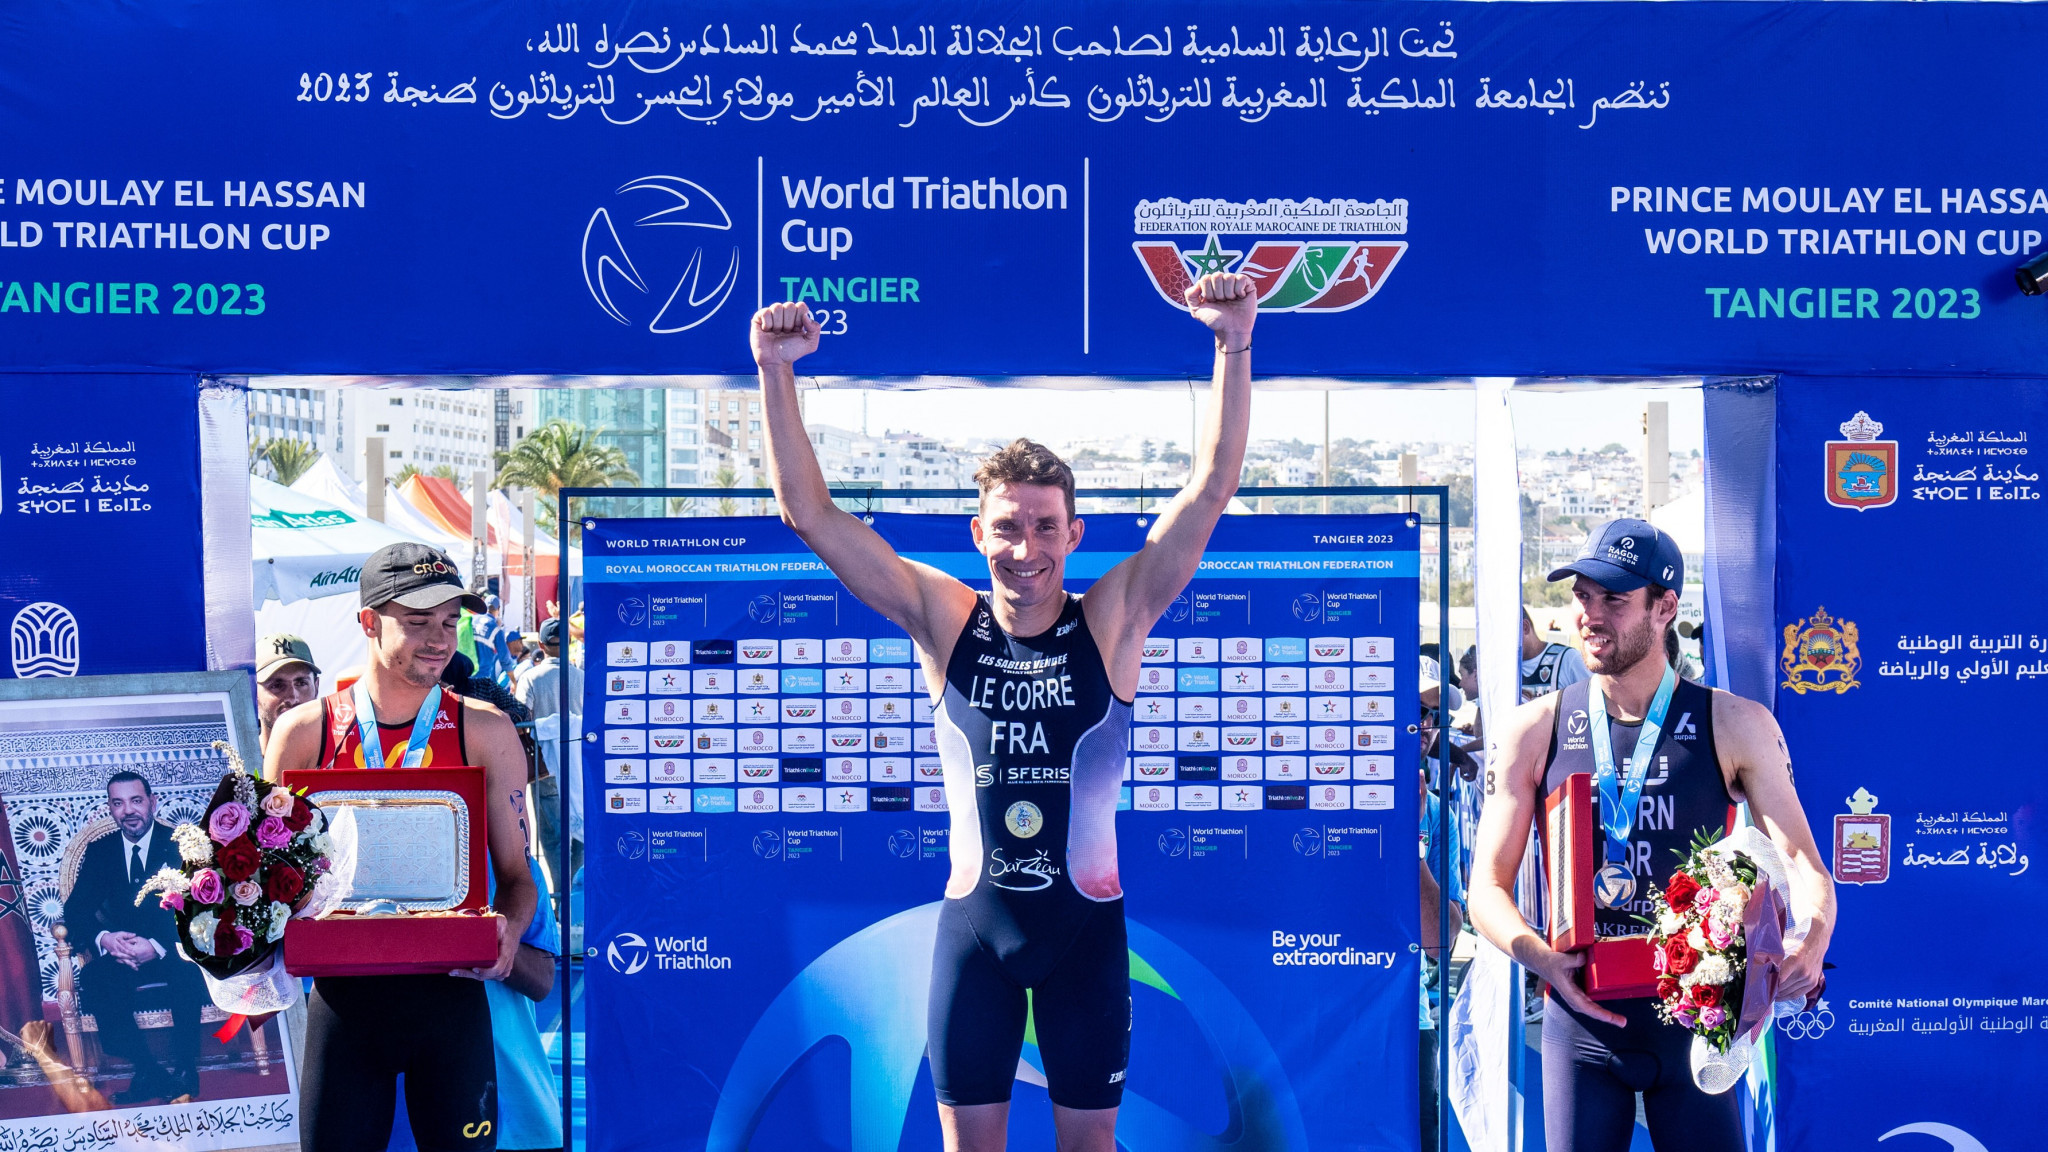 Pierre Le Corre followed up a third-place finish at the World Triathlon Championship Finals with victory at the World Triathlon Cup in Tangier ©World Triathlon